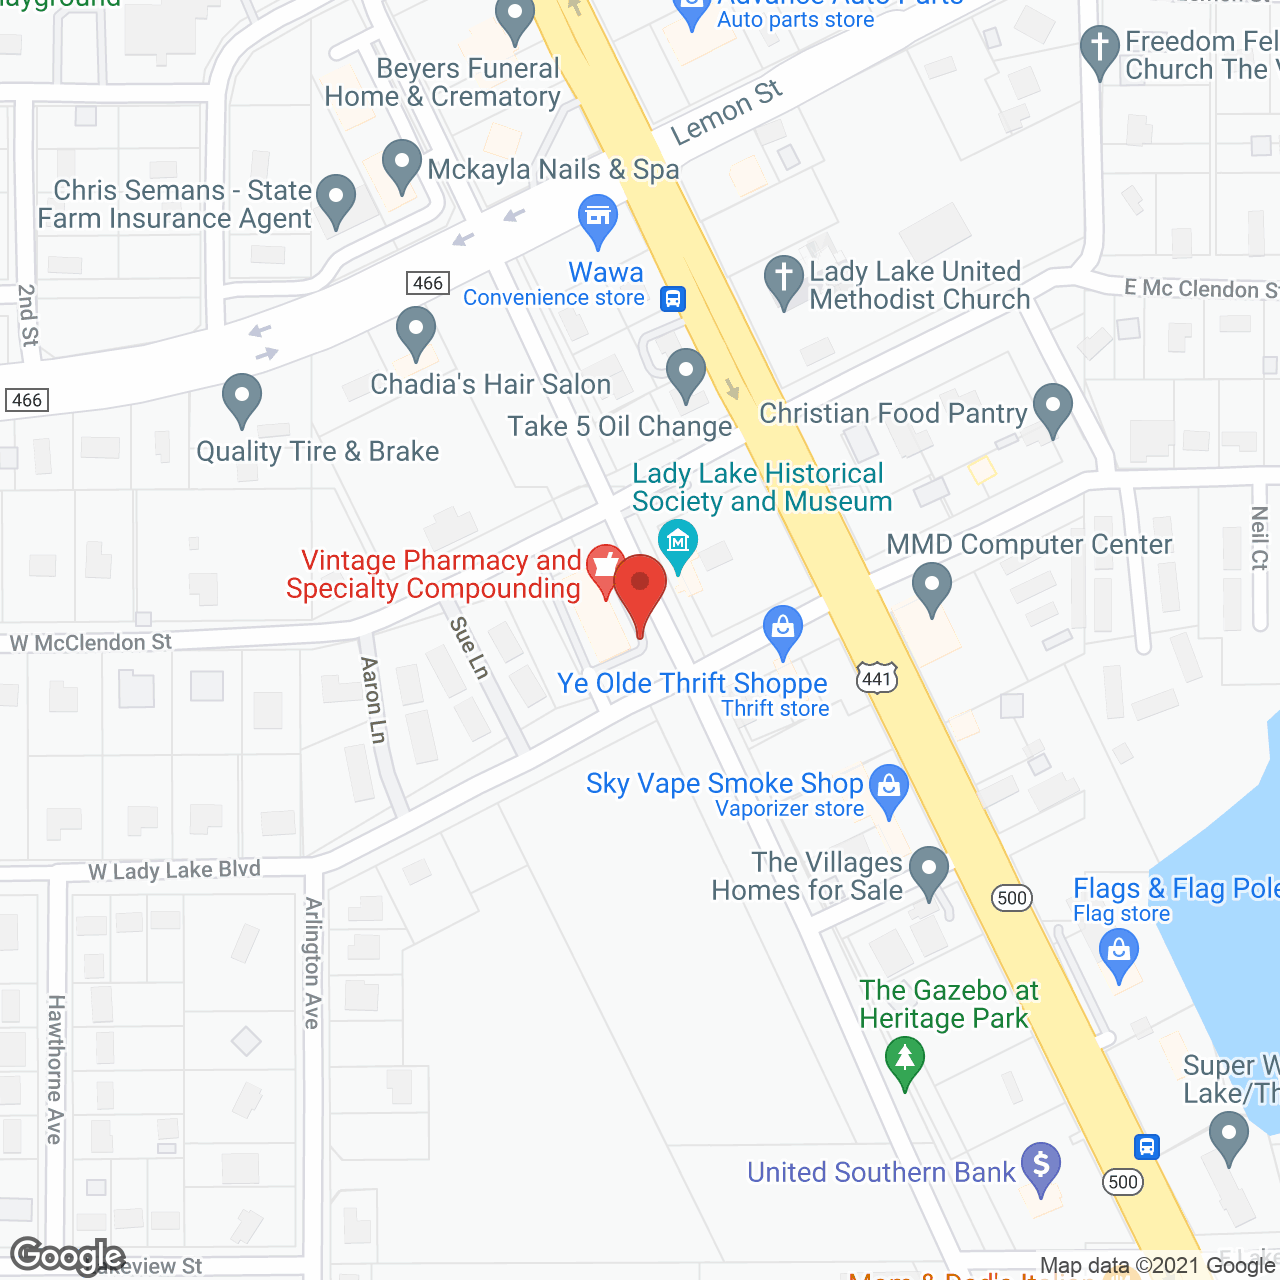 Buffalo Crossings Assisted Living Community in google map